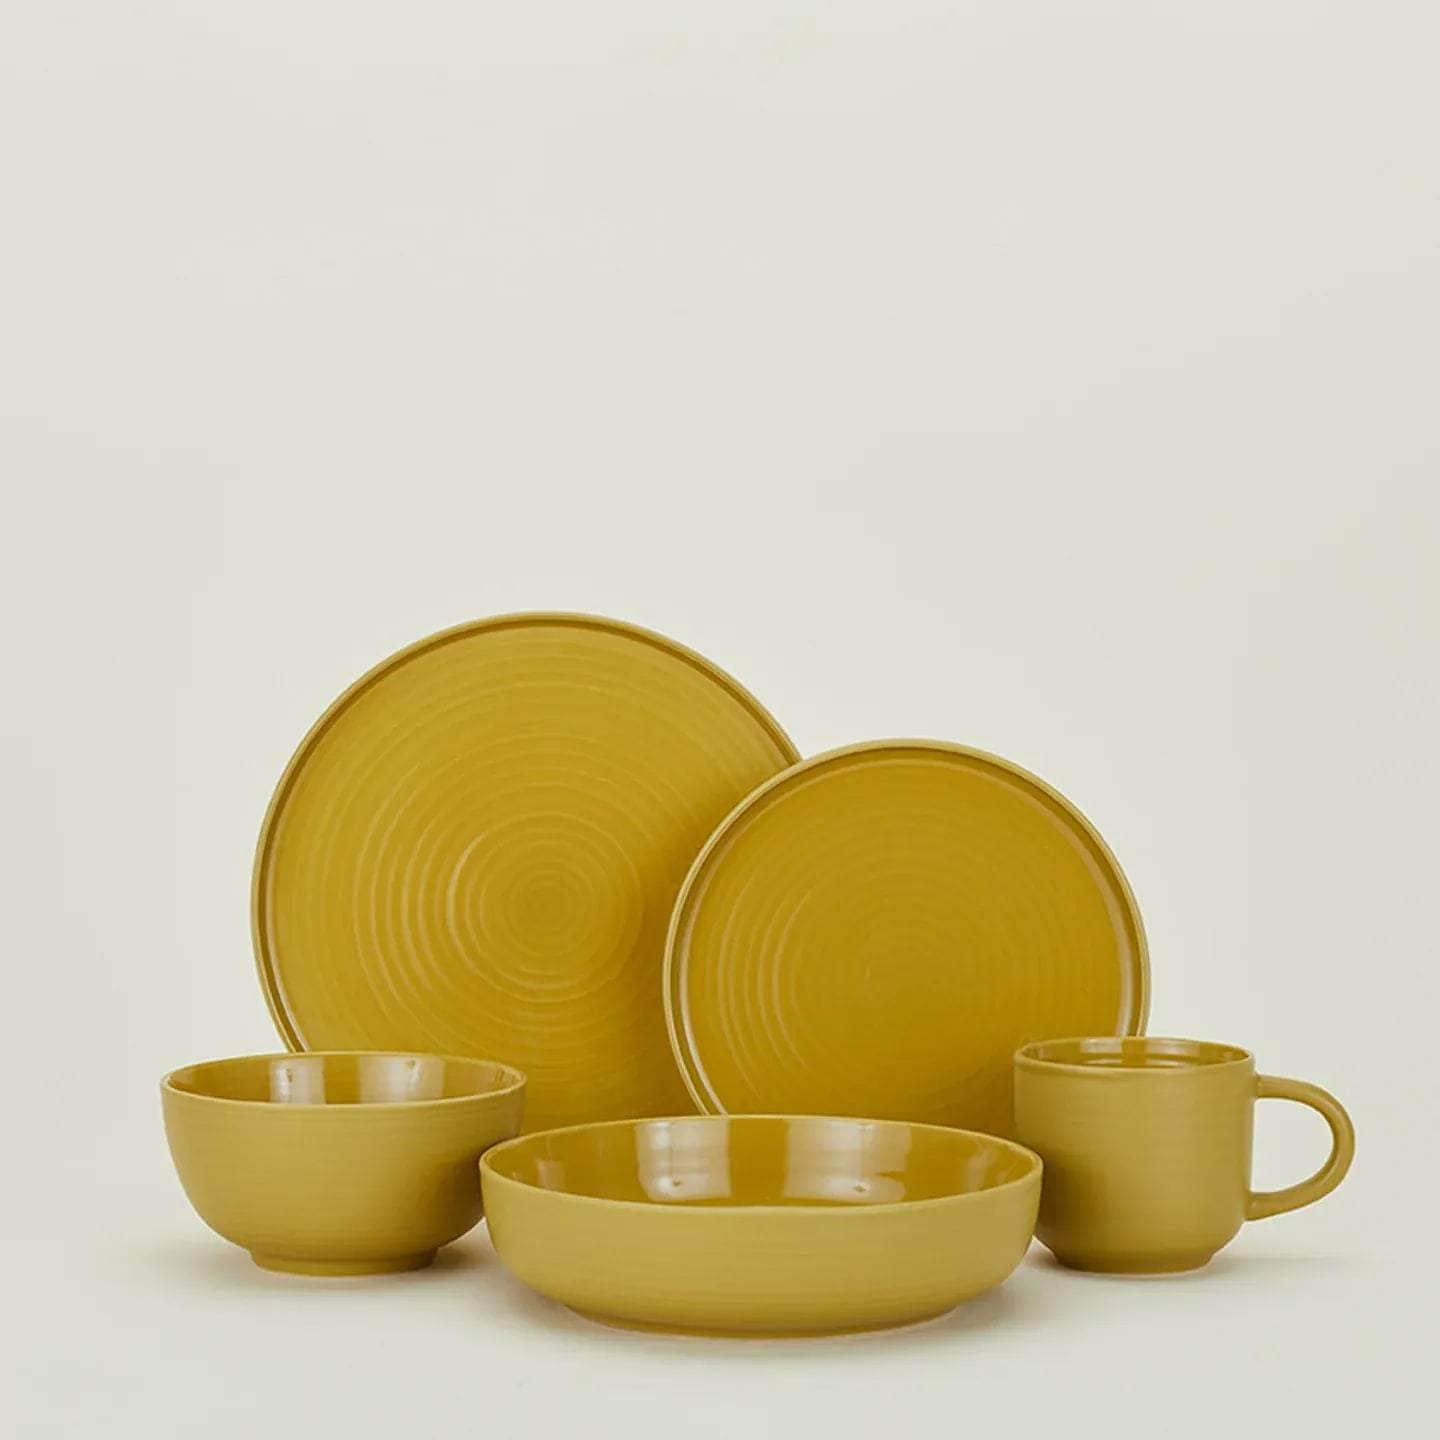 Load image into Gallery viewer, Essential Large Bowl - Set Of 4, Mustard
